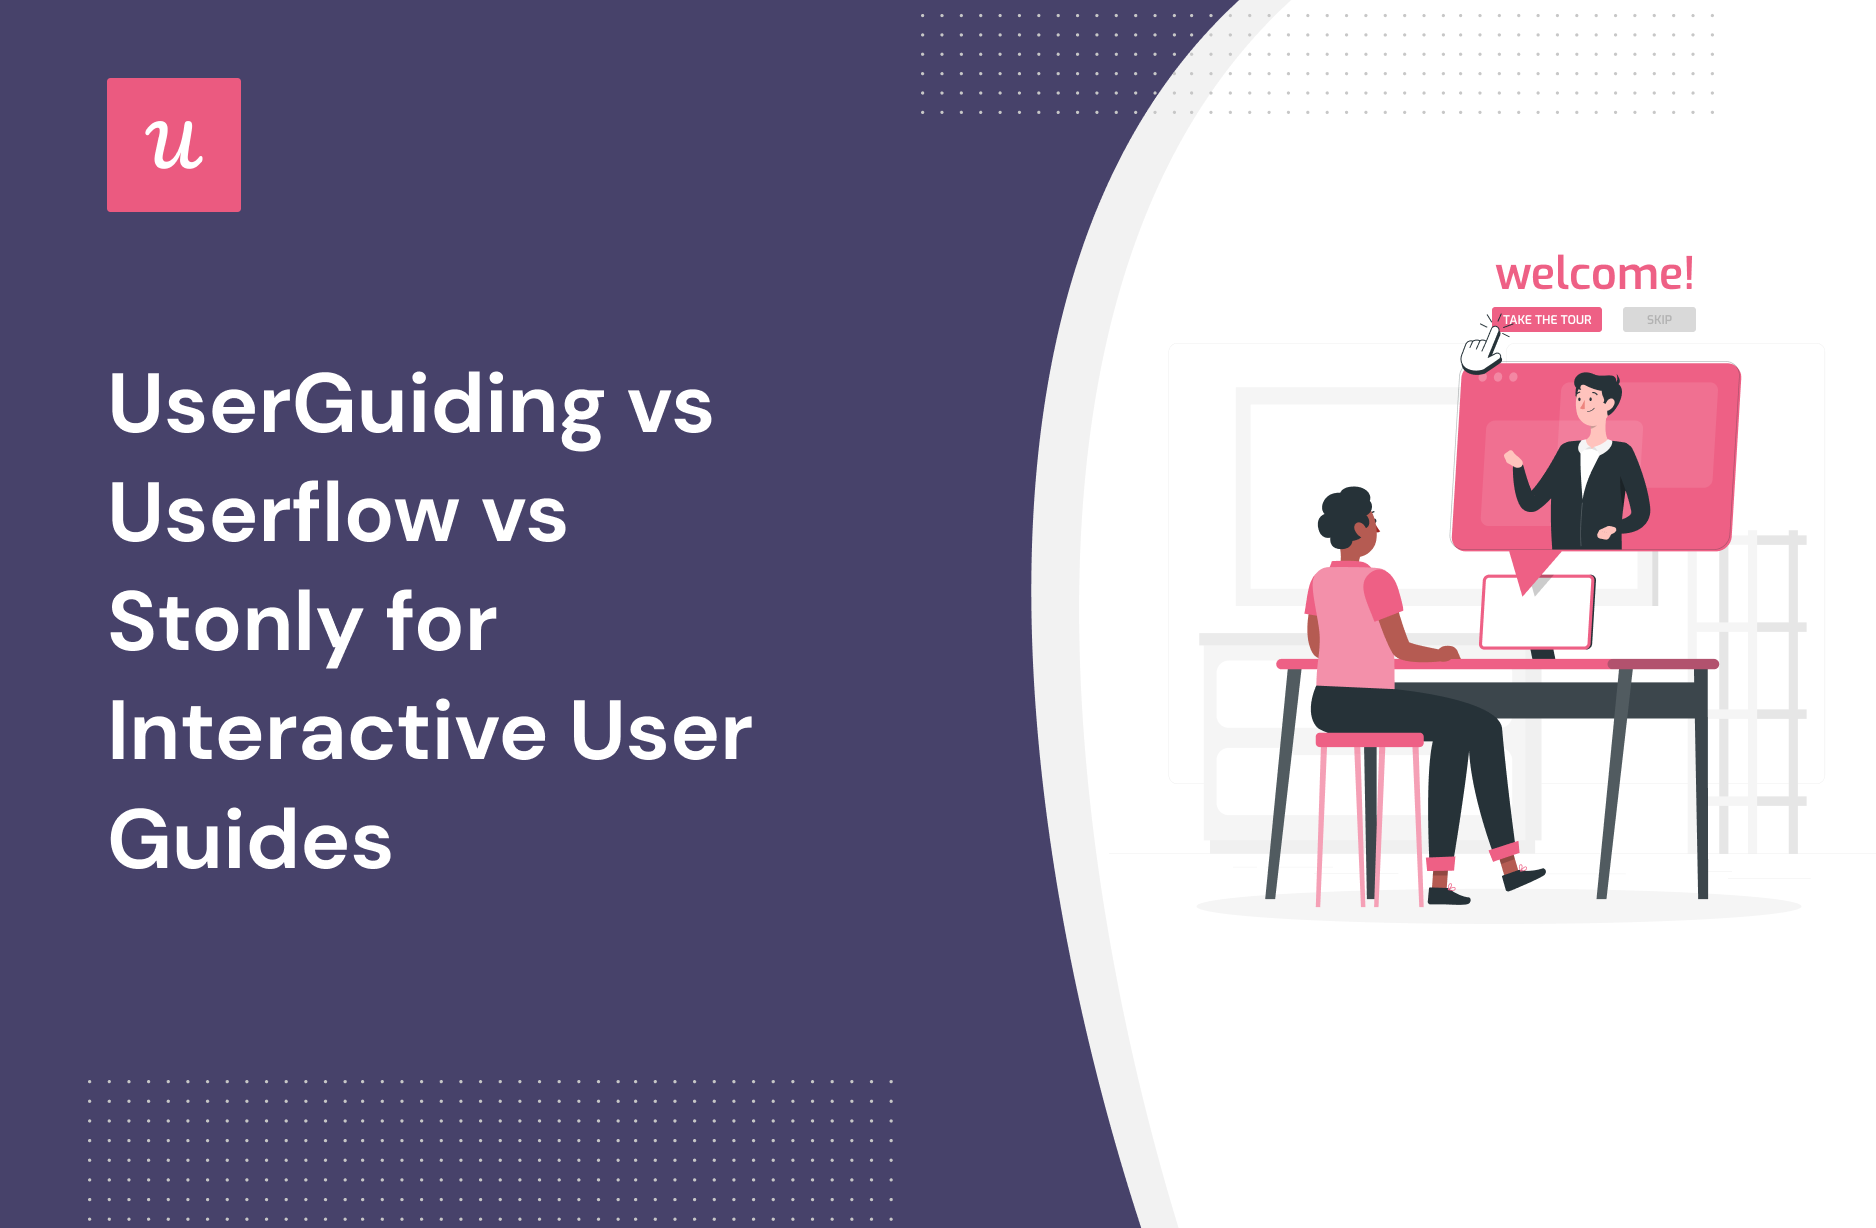 UserGuiding vs Userflow vs Stonly for Interactive User Guides